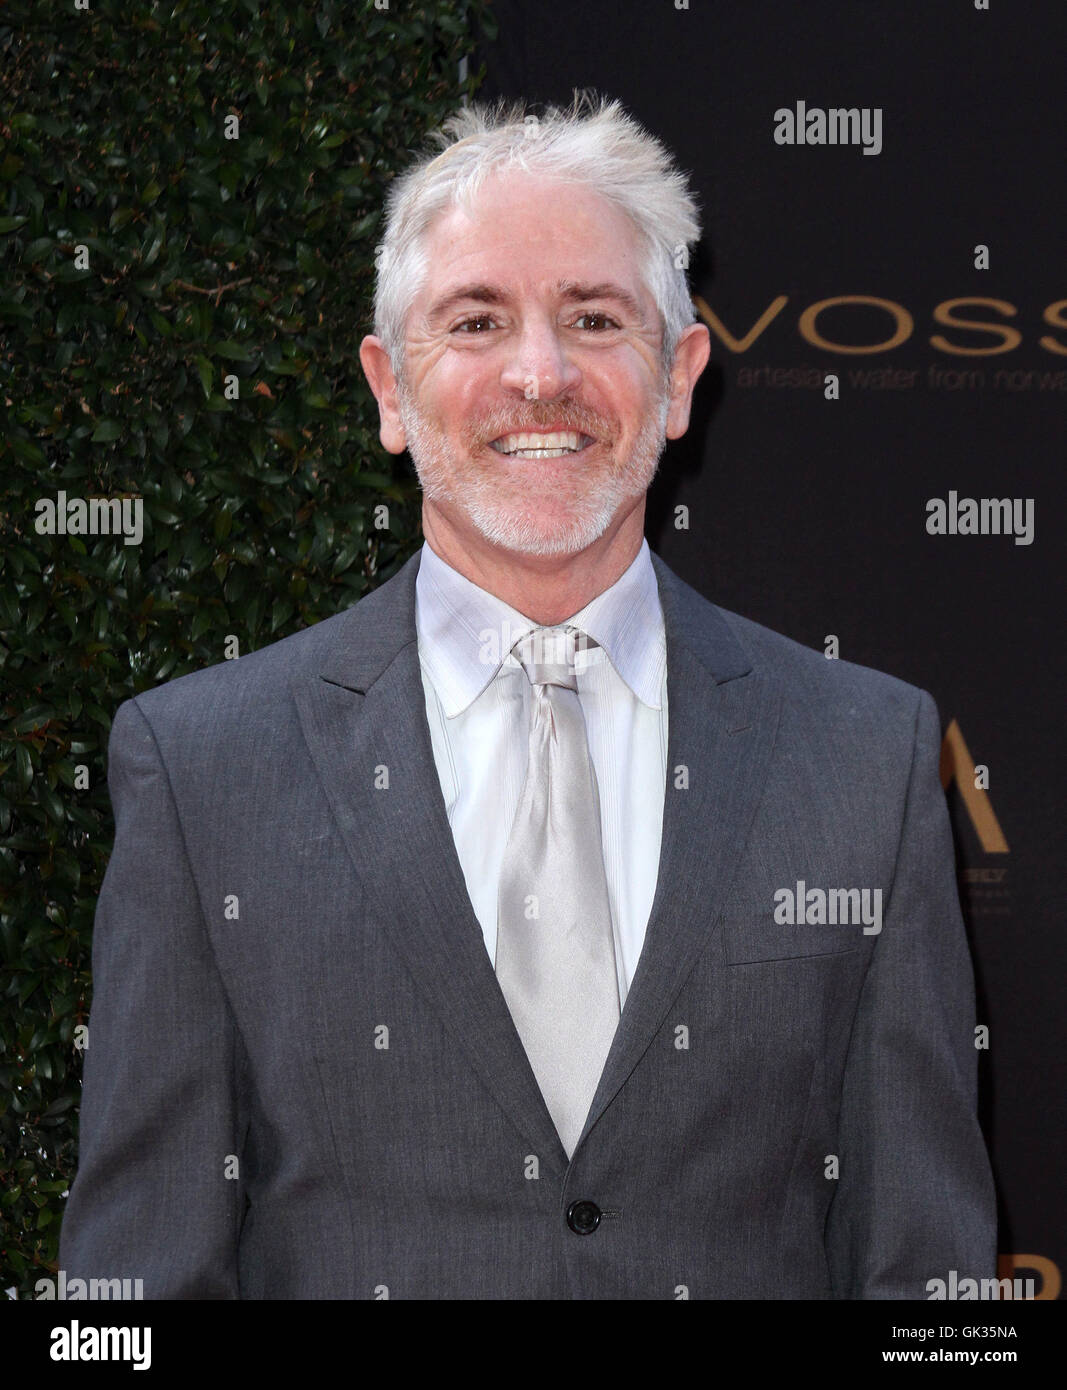 43rd Annual Daytime Creative Arts Emmy Awards 2016 at the Westin Bonaventure Hotel & Suites - Arrivals  Featuring: Carlos Alazraqui Where: Los Angeles, California, United States When: 29 Apr 2016 Stock Photo